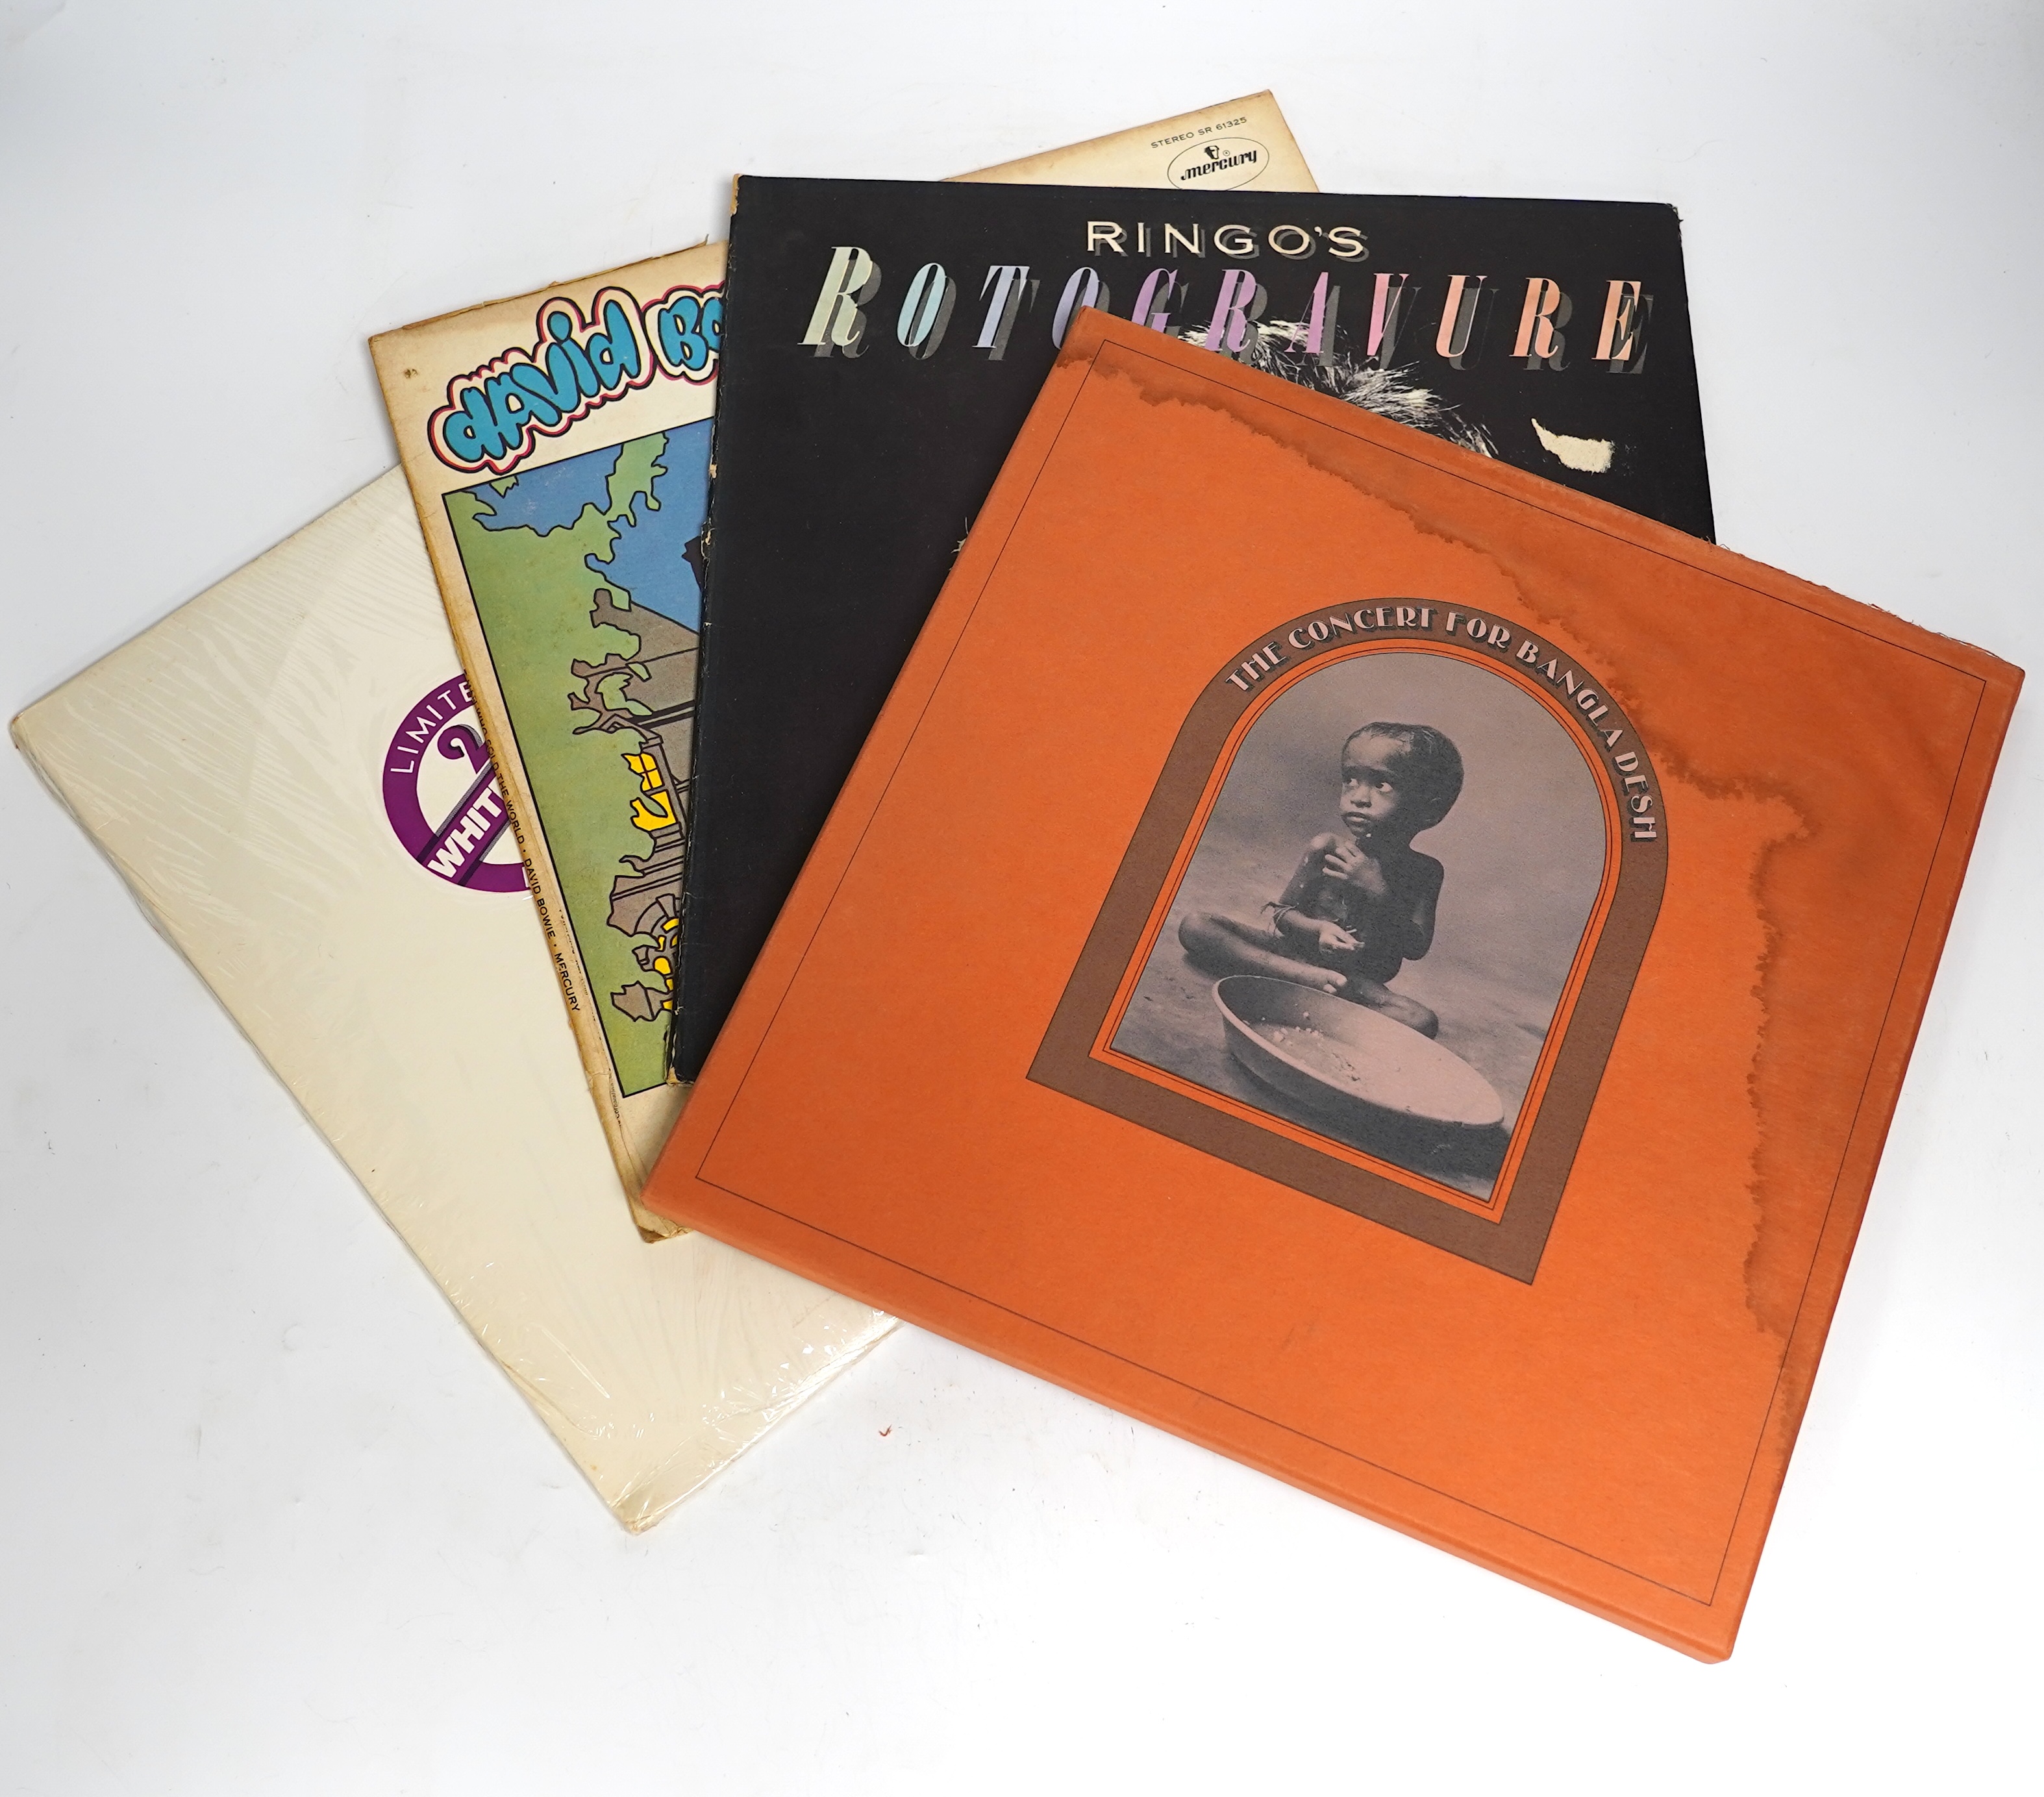 Four LP record albums; The Beatles; The White Album, U.S. issue on Capitol label SEBX-1-11841 on white vinyl, George Harrison; The Concert for Bangladesh box set, Ringo Starr; Rotogravure, on Polydor Argentinian issue, a